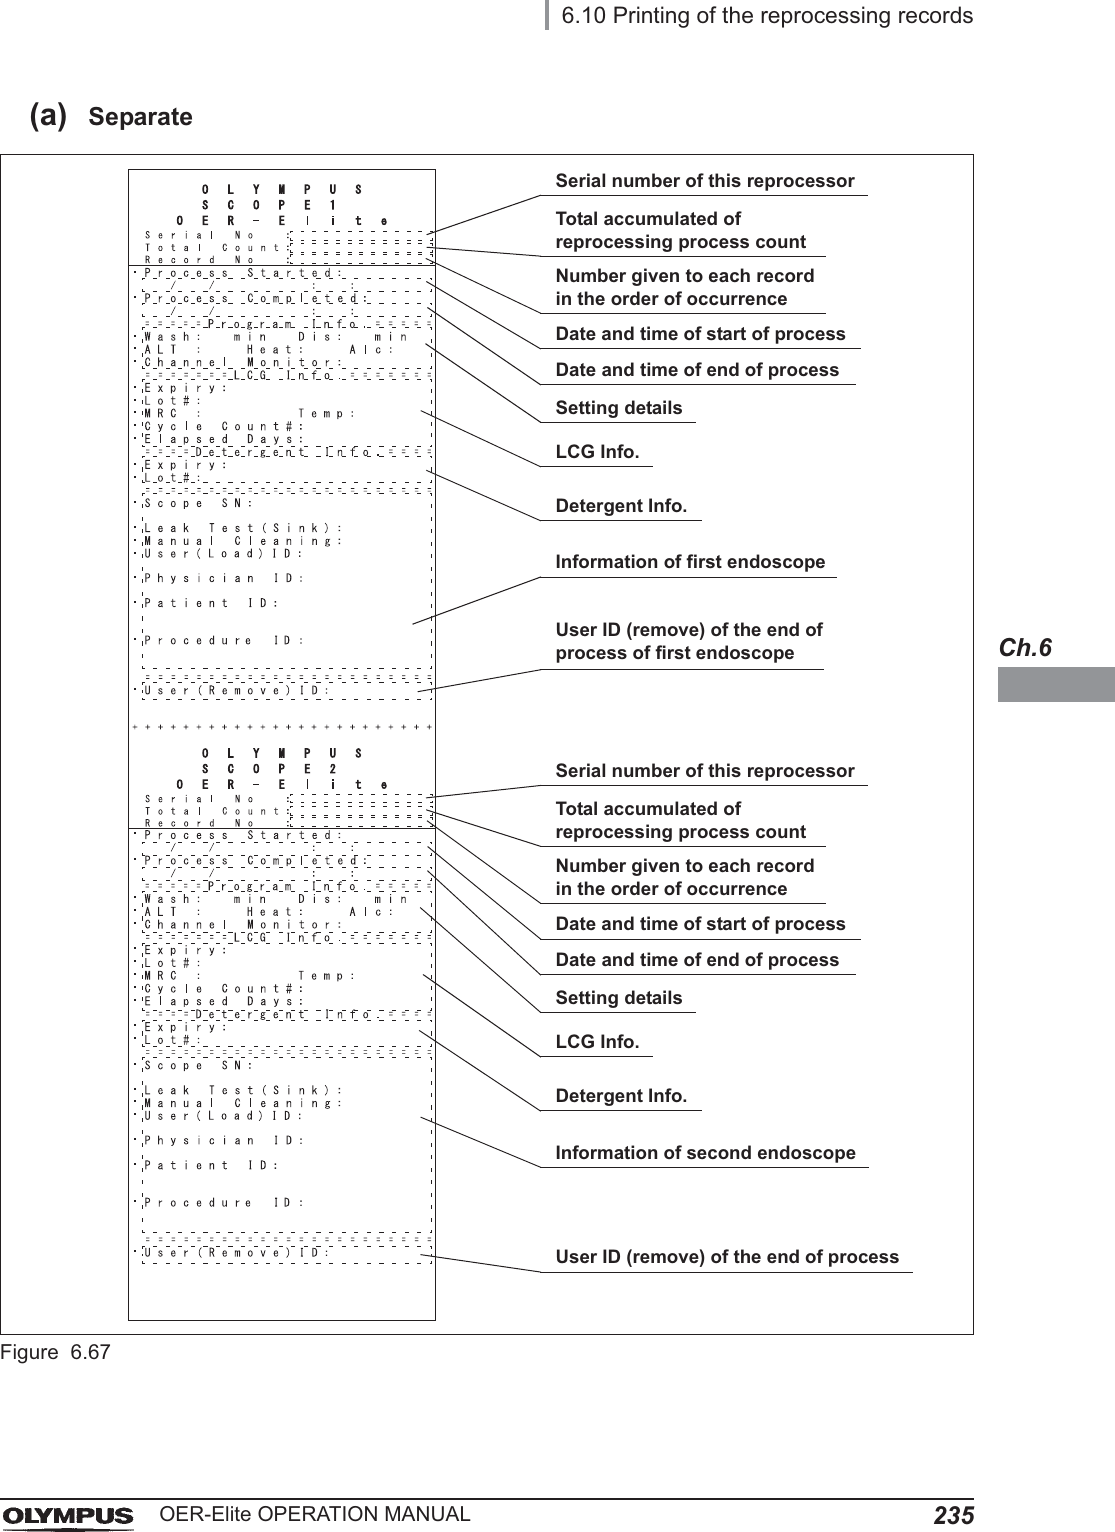 6.10 Printing of the reprocessing records235OER-Elite OPERATION MANUALCh.6(a) SeparateFigure 6.67Serial number of this reprocessorDate and time of start of processDate and time of end of processInformation of first endoscopeUser ID (remove) of the end of process of first endoscopeTotal accumulated of reprocessing process countNumber given to each record in the order of occurrenceSetting detailsLCG Info.Detergent Info.Serial number of this reprocessorDate and time of start of processDate and time of end of processInformation of second endoscopeUser ID (remove) of the end of processTotal accumulated of reprocessing process countNumber given to each record in the order of occurrenceSetting detailsLCG Info.Detergent Info.